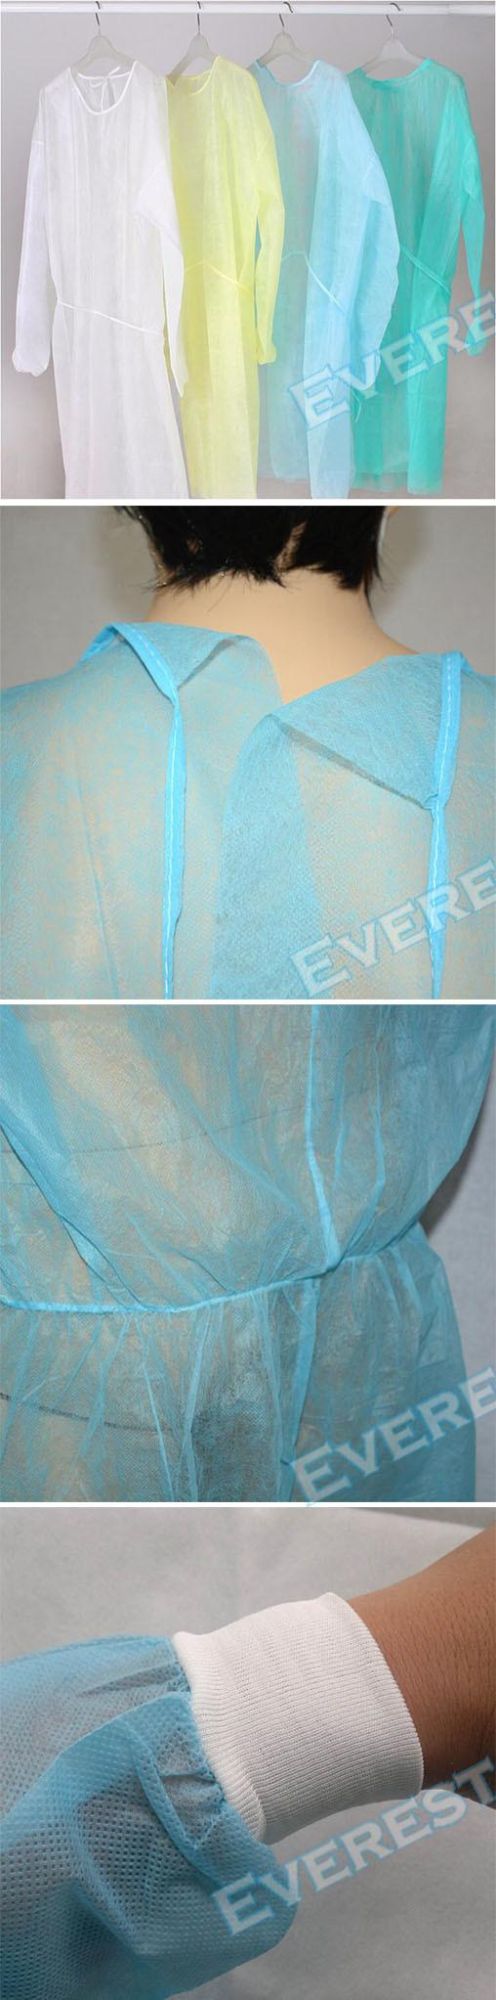 Hospital Disposable Isolation Gown